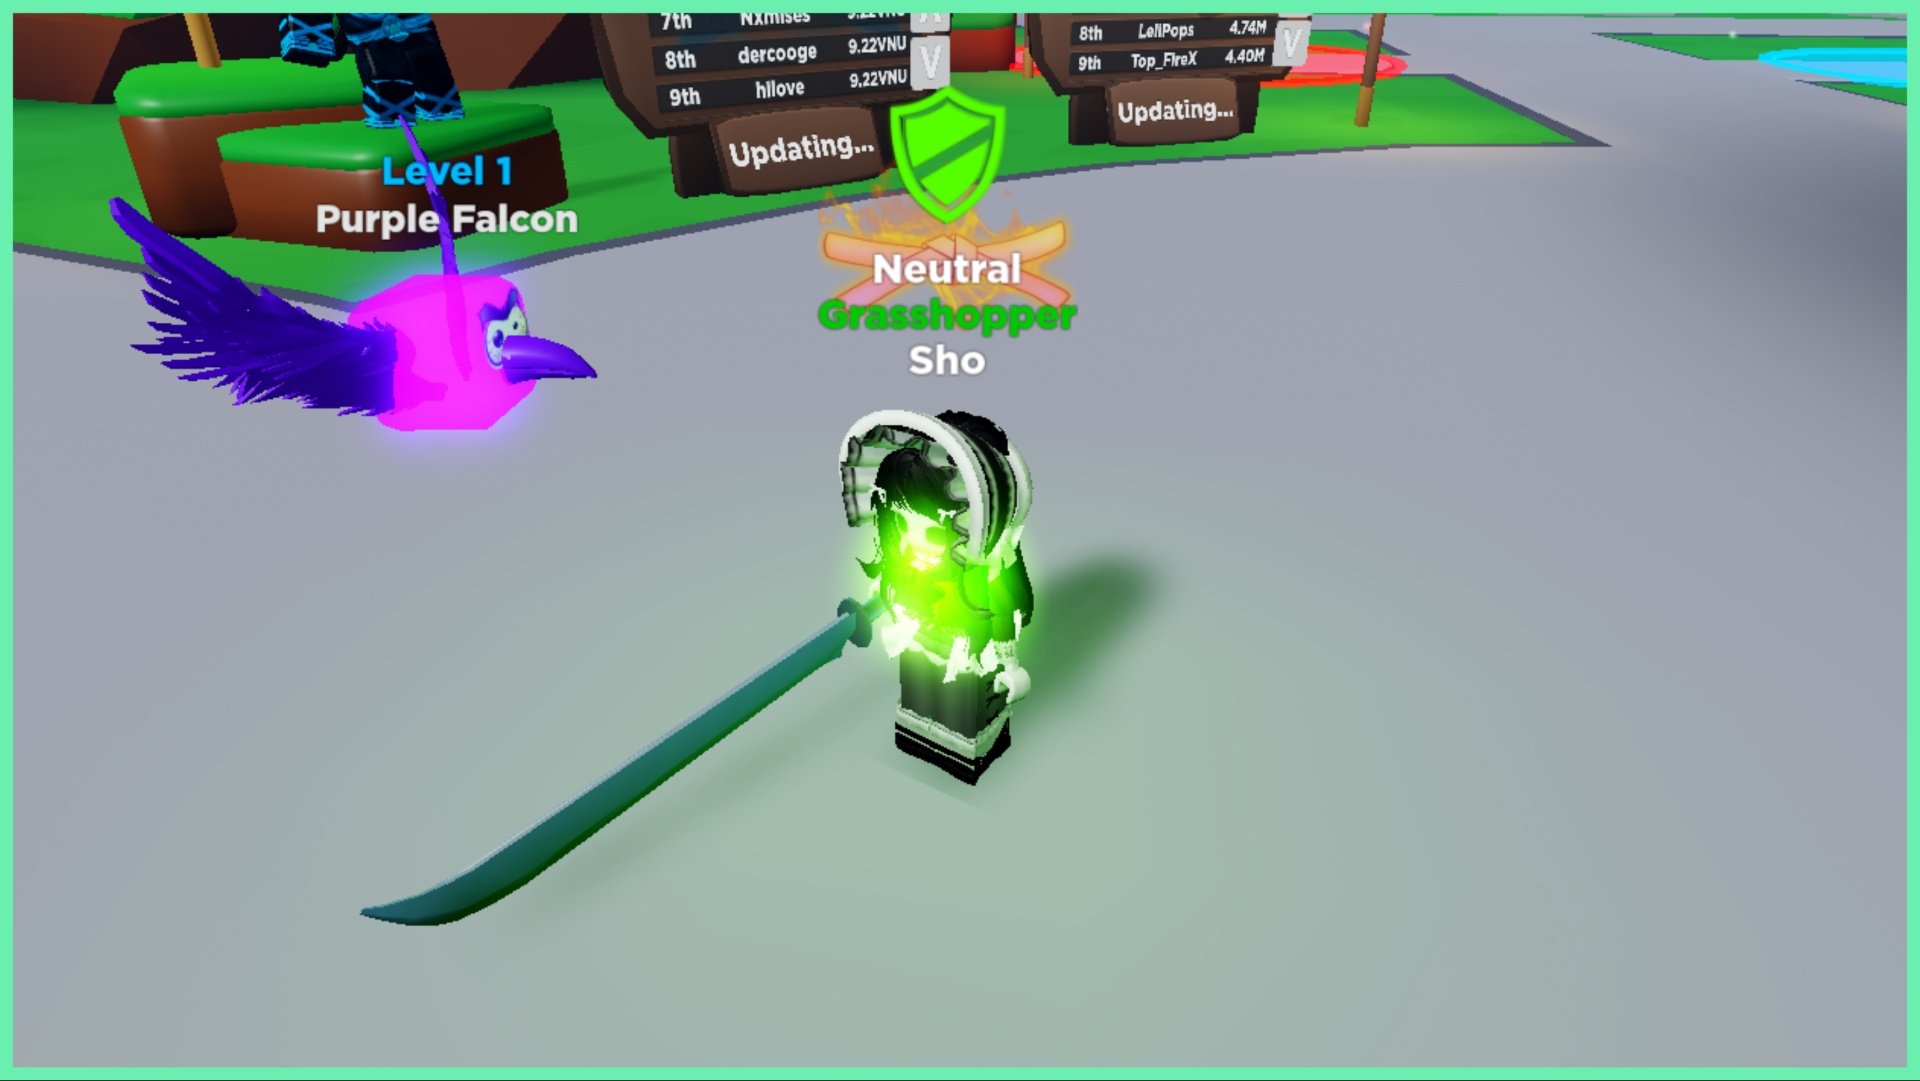 the image shows my avatar who is pale with a maid outfit holding a long dark black sword. She has a green aura over her face and a purple falcon is flying to the left of her. You can see that she is stood idly in the lobby of the ninja legends game on the grey path nearby a leaderboard